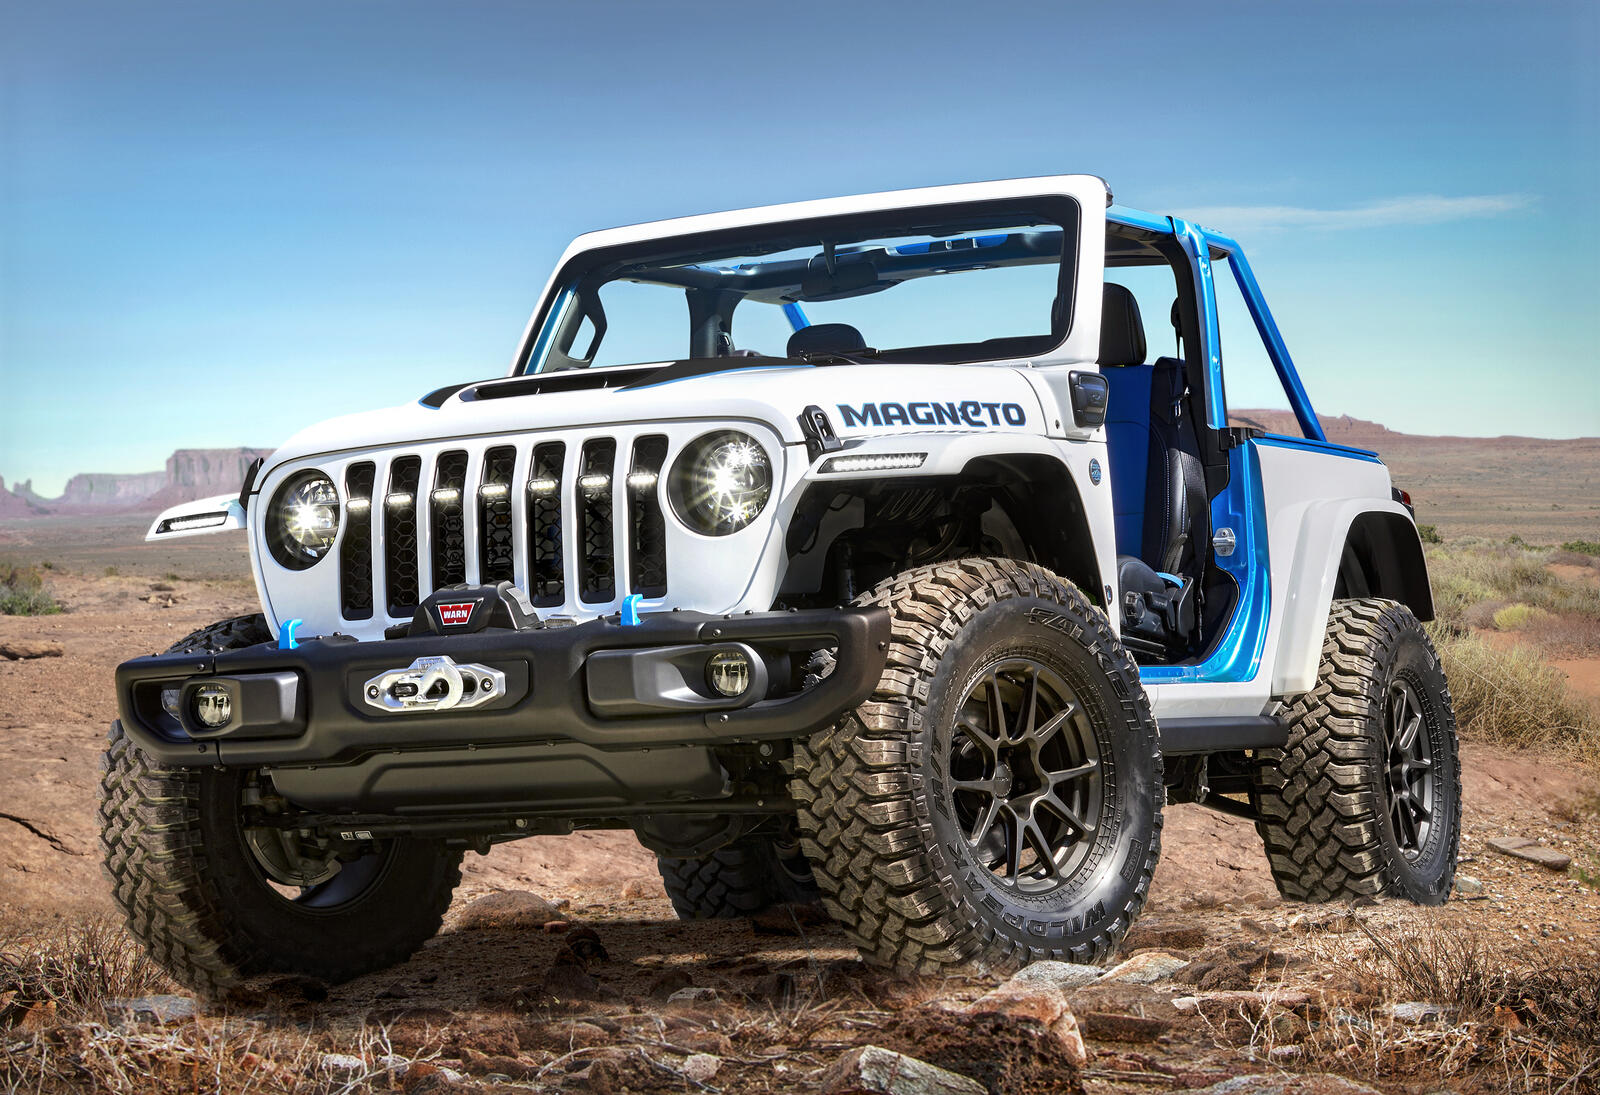 Wallpapers auto Jeep tuning on the desktop